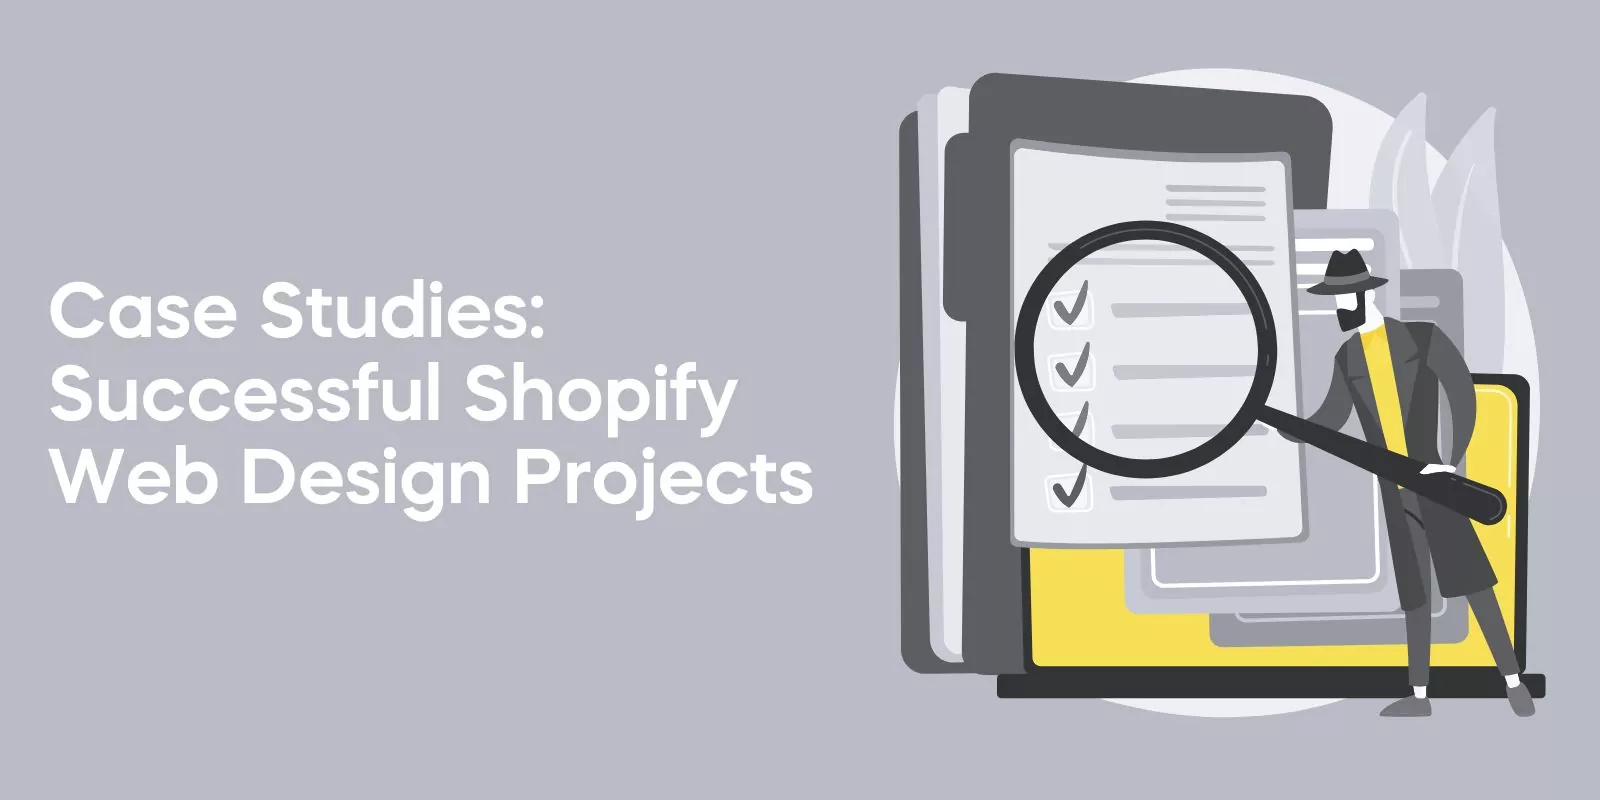 Case Studies Sucacessful Shopify Web Design Projects